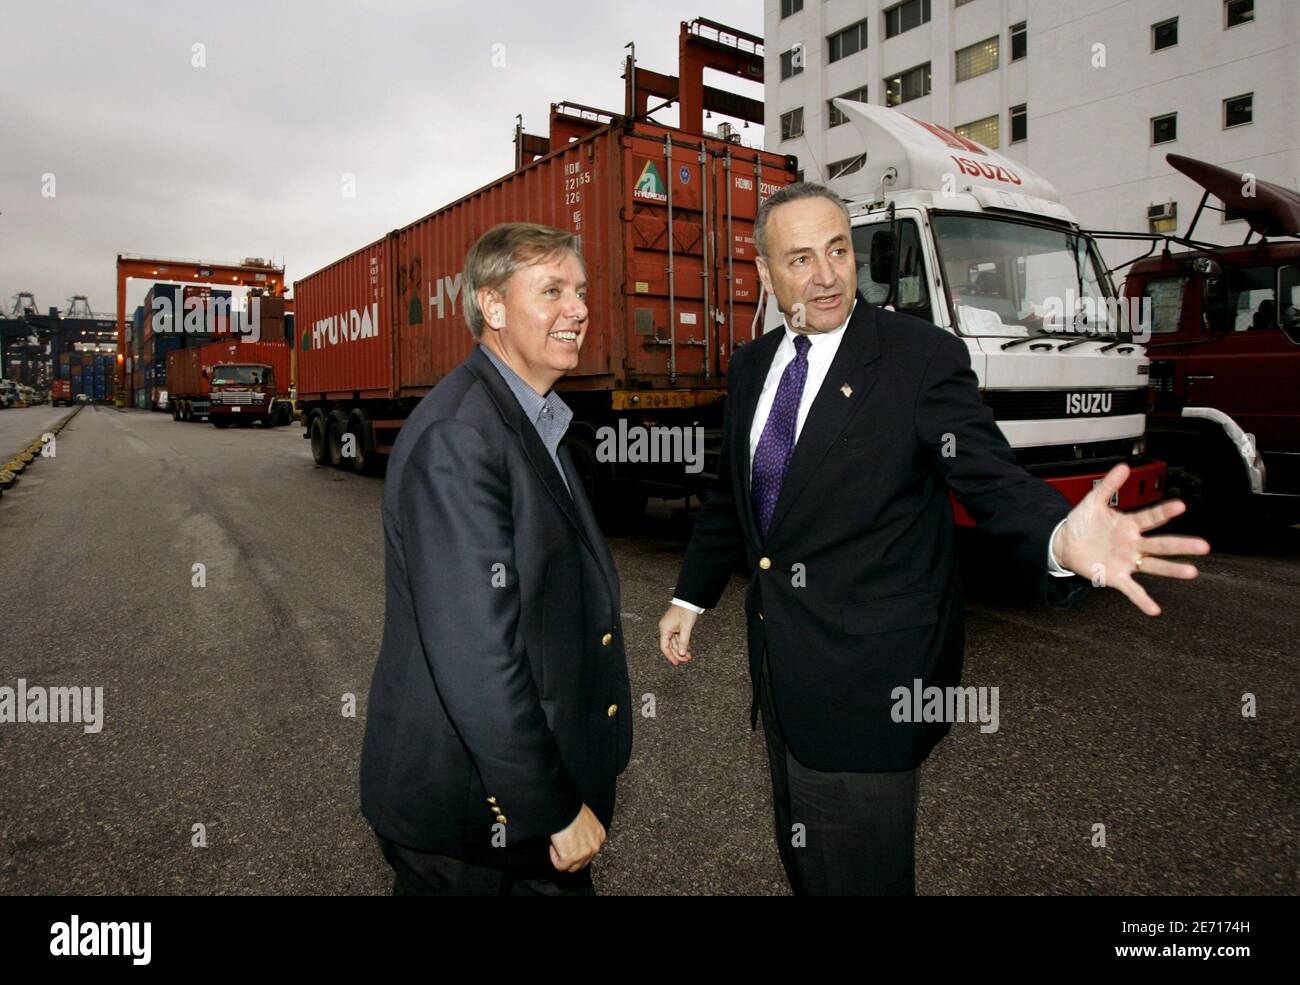 U.S. Senators Charles Schumer (R) of New York and Lindsey Graham of South Carolina visit a Hutchison International container port in Hong Kong March 25, 2006. In the aftermath of the Dubai ports dispute, the Bush administration is negotiating with Hong Kong-based Hutchison Whampoa Ltd on a contract involving nuclear detection devices at Freeport, Bahamas, that would monitor cargo passing through to the United States.  REUTERS/Kin Cheung/Pool Stock Photo